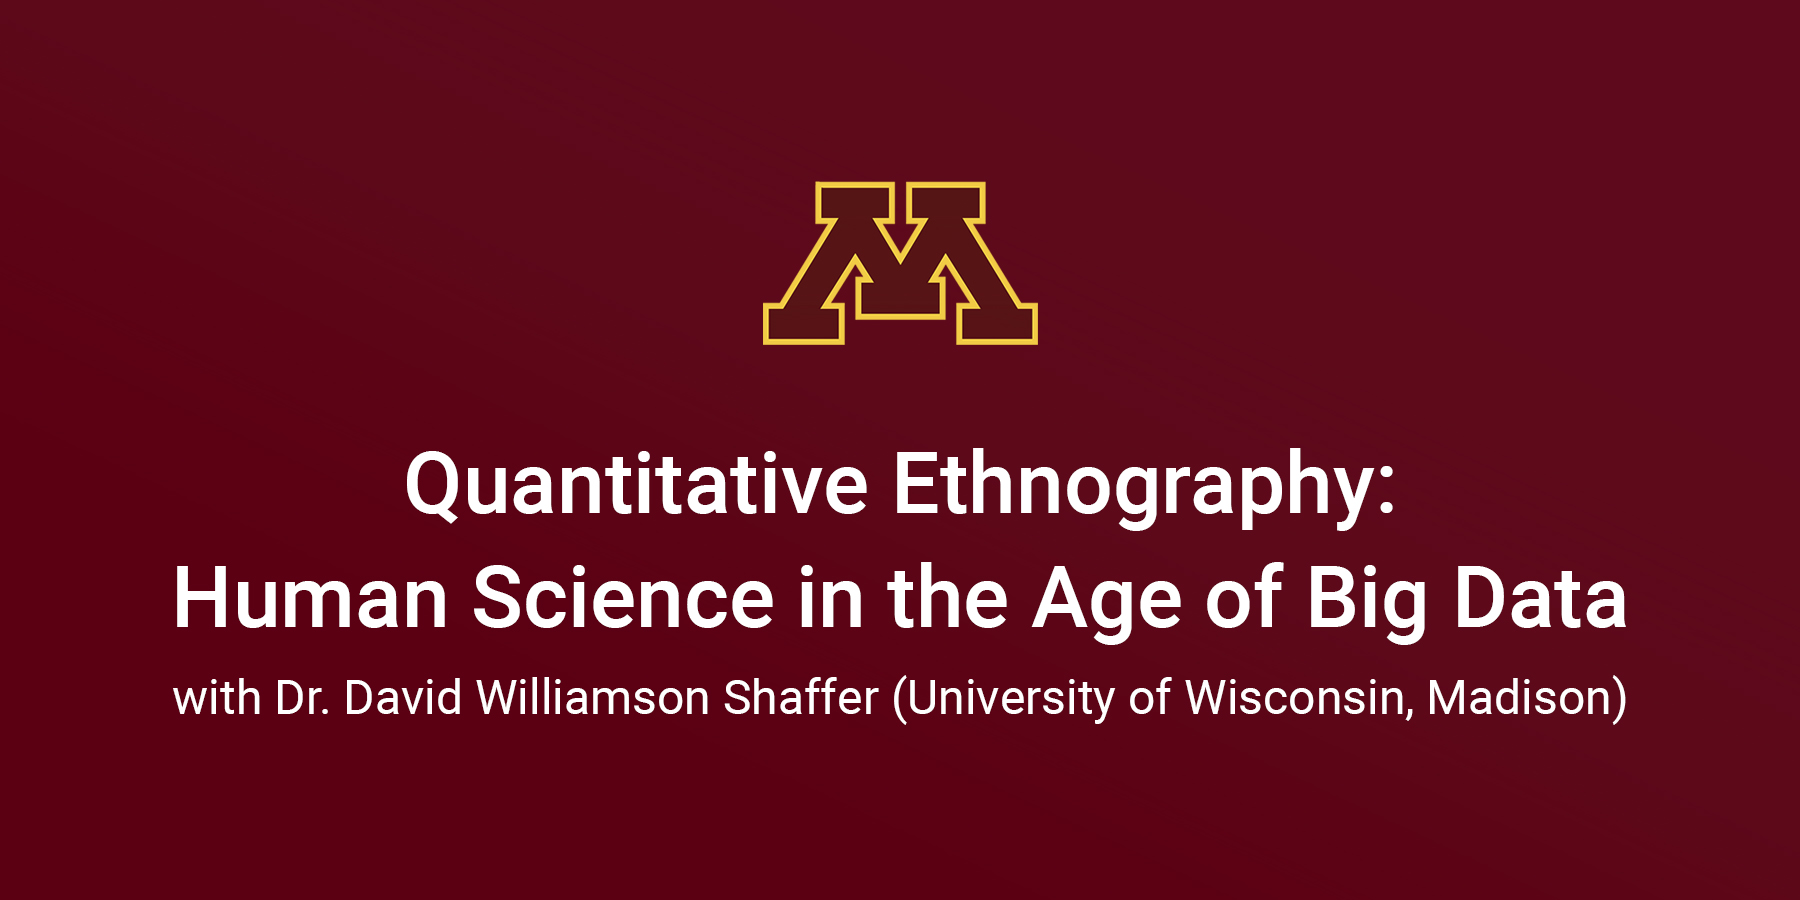 University of Minnesota’s LIL Seminar Series: Human Science in the Age of Big Data with Dr. David Williamson Shaffer